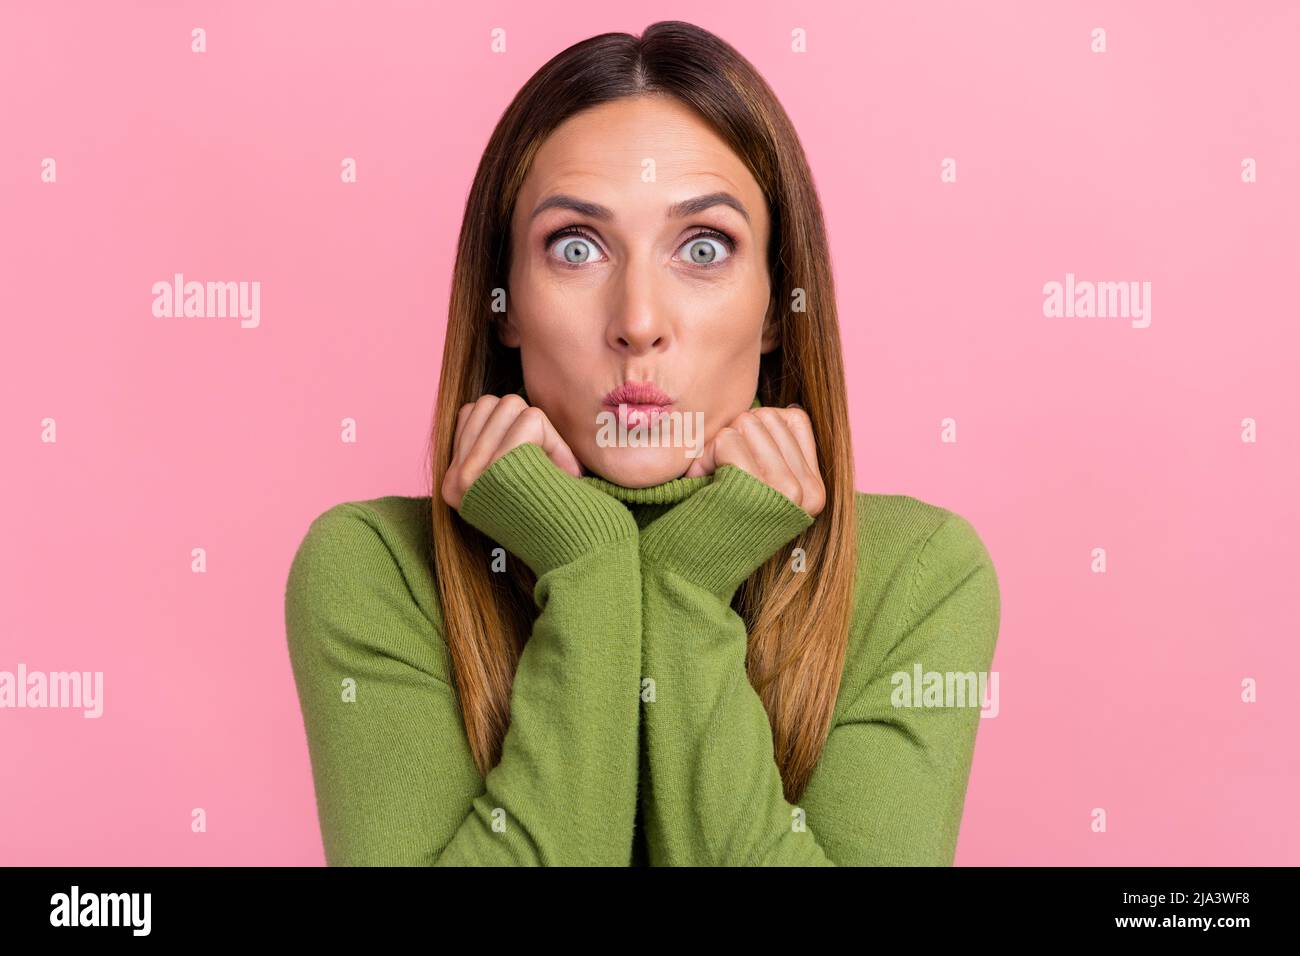 Portrait of adorable sweet lady make ridiculous face joking lips pouted isolated on pastel color background Stock Photo